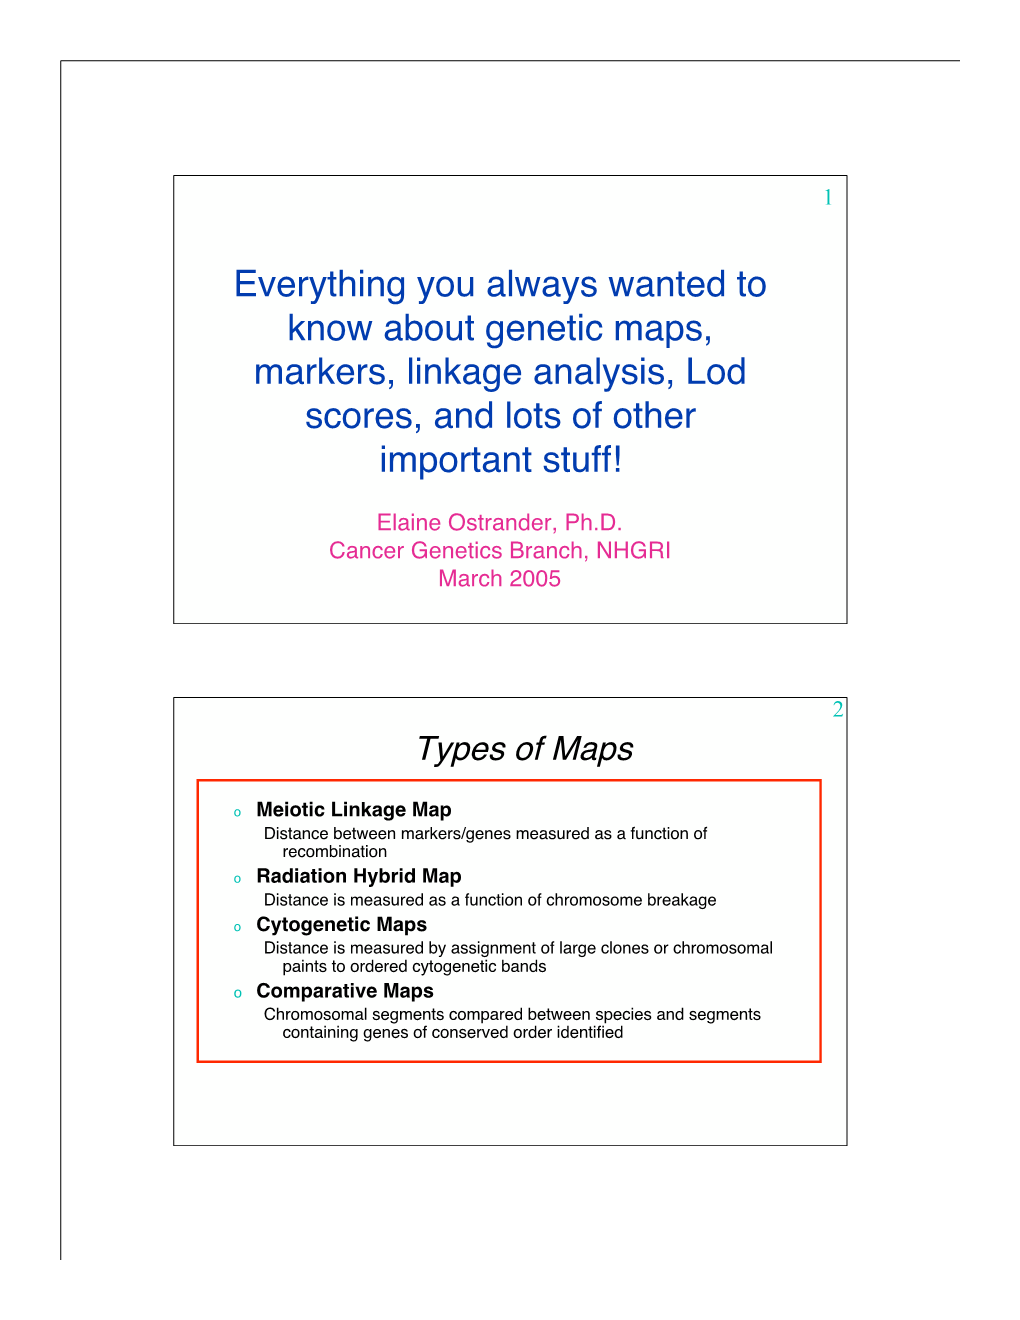 Everything You Always Wanted to Know About Genetic Maps, Markers, Linkage Analysis, Lod Scores, and Lots of Other Important Stuff!